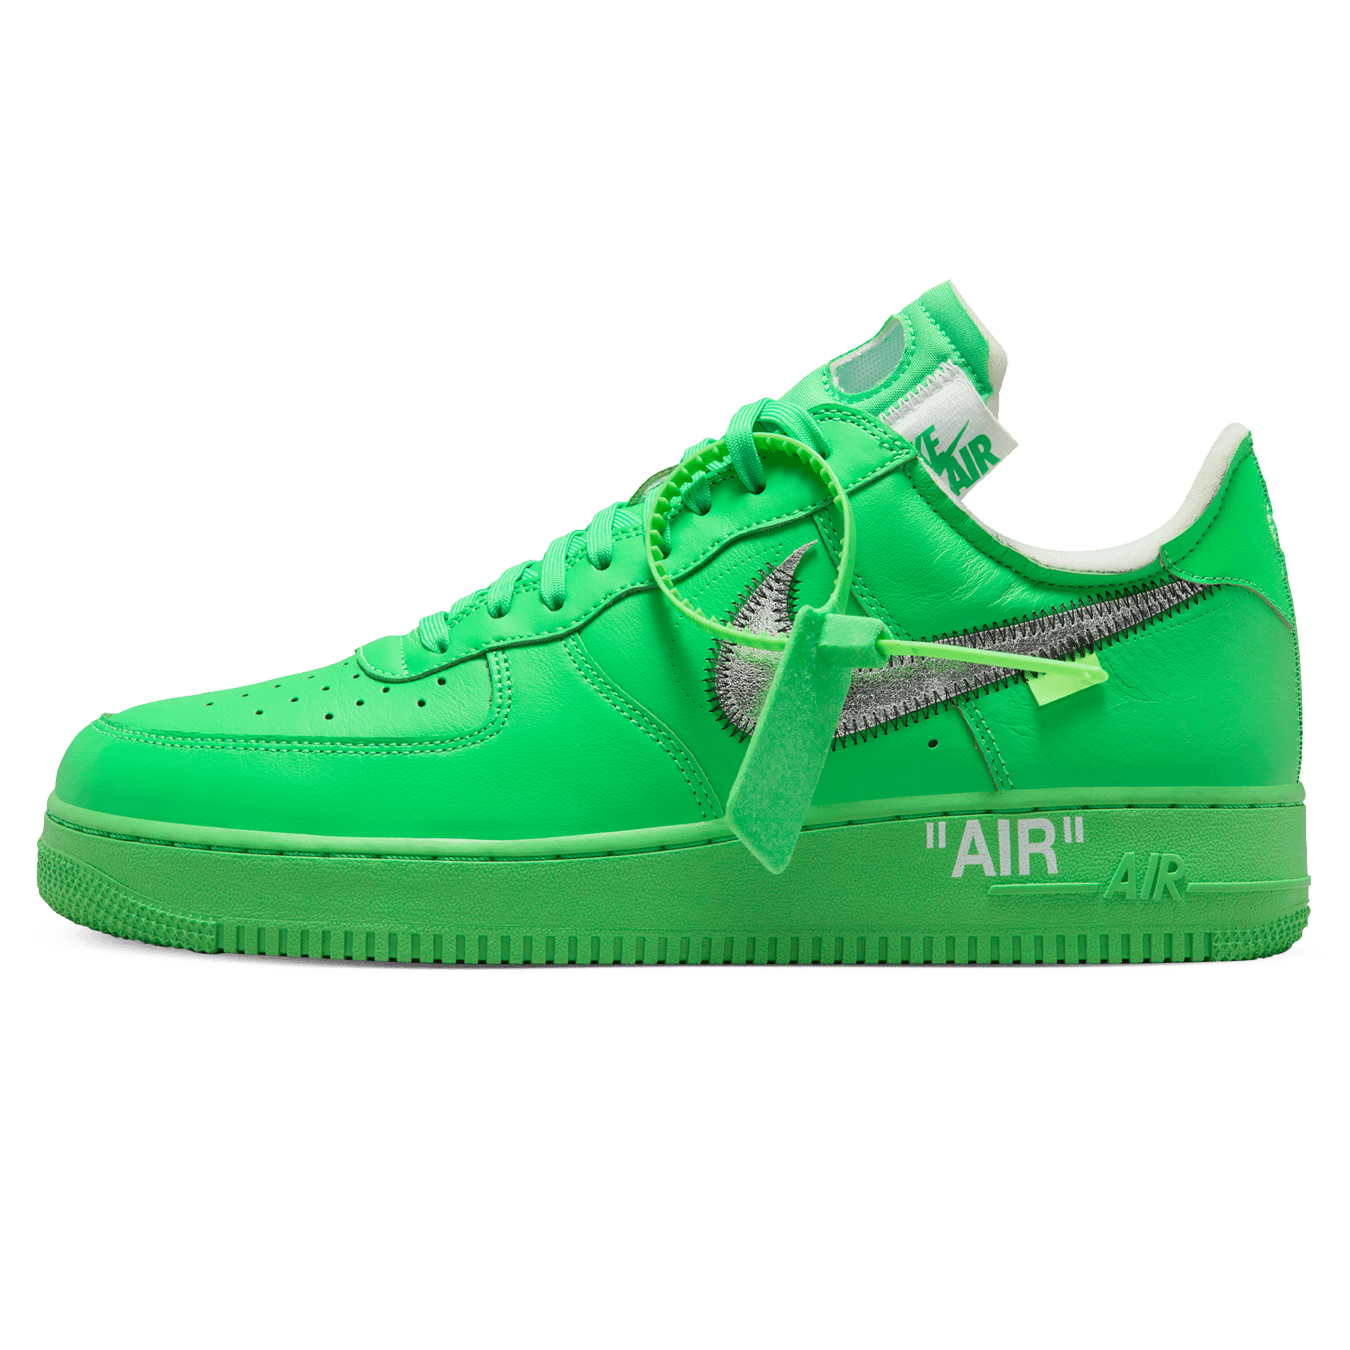 Off White x Air Force 1 Low Brooklyn DX1419 300